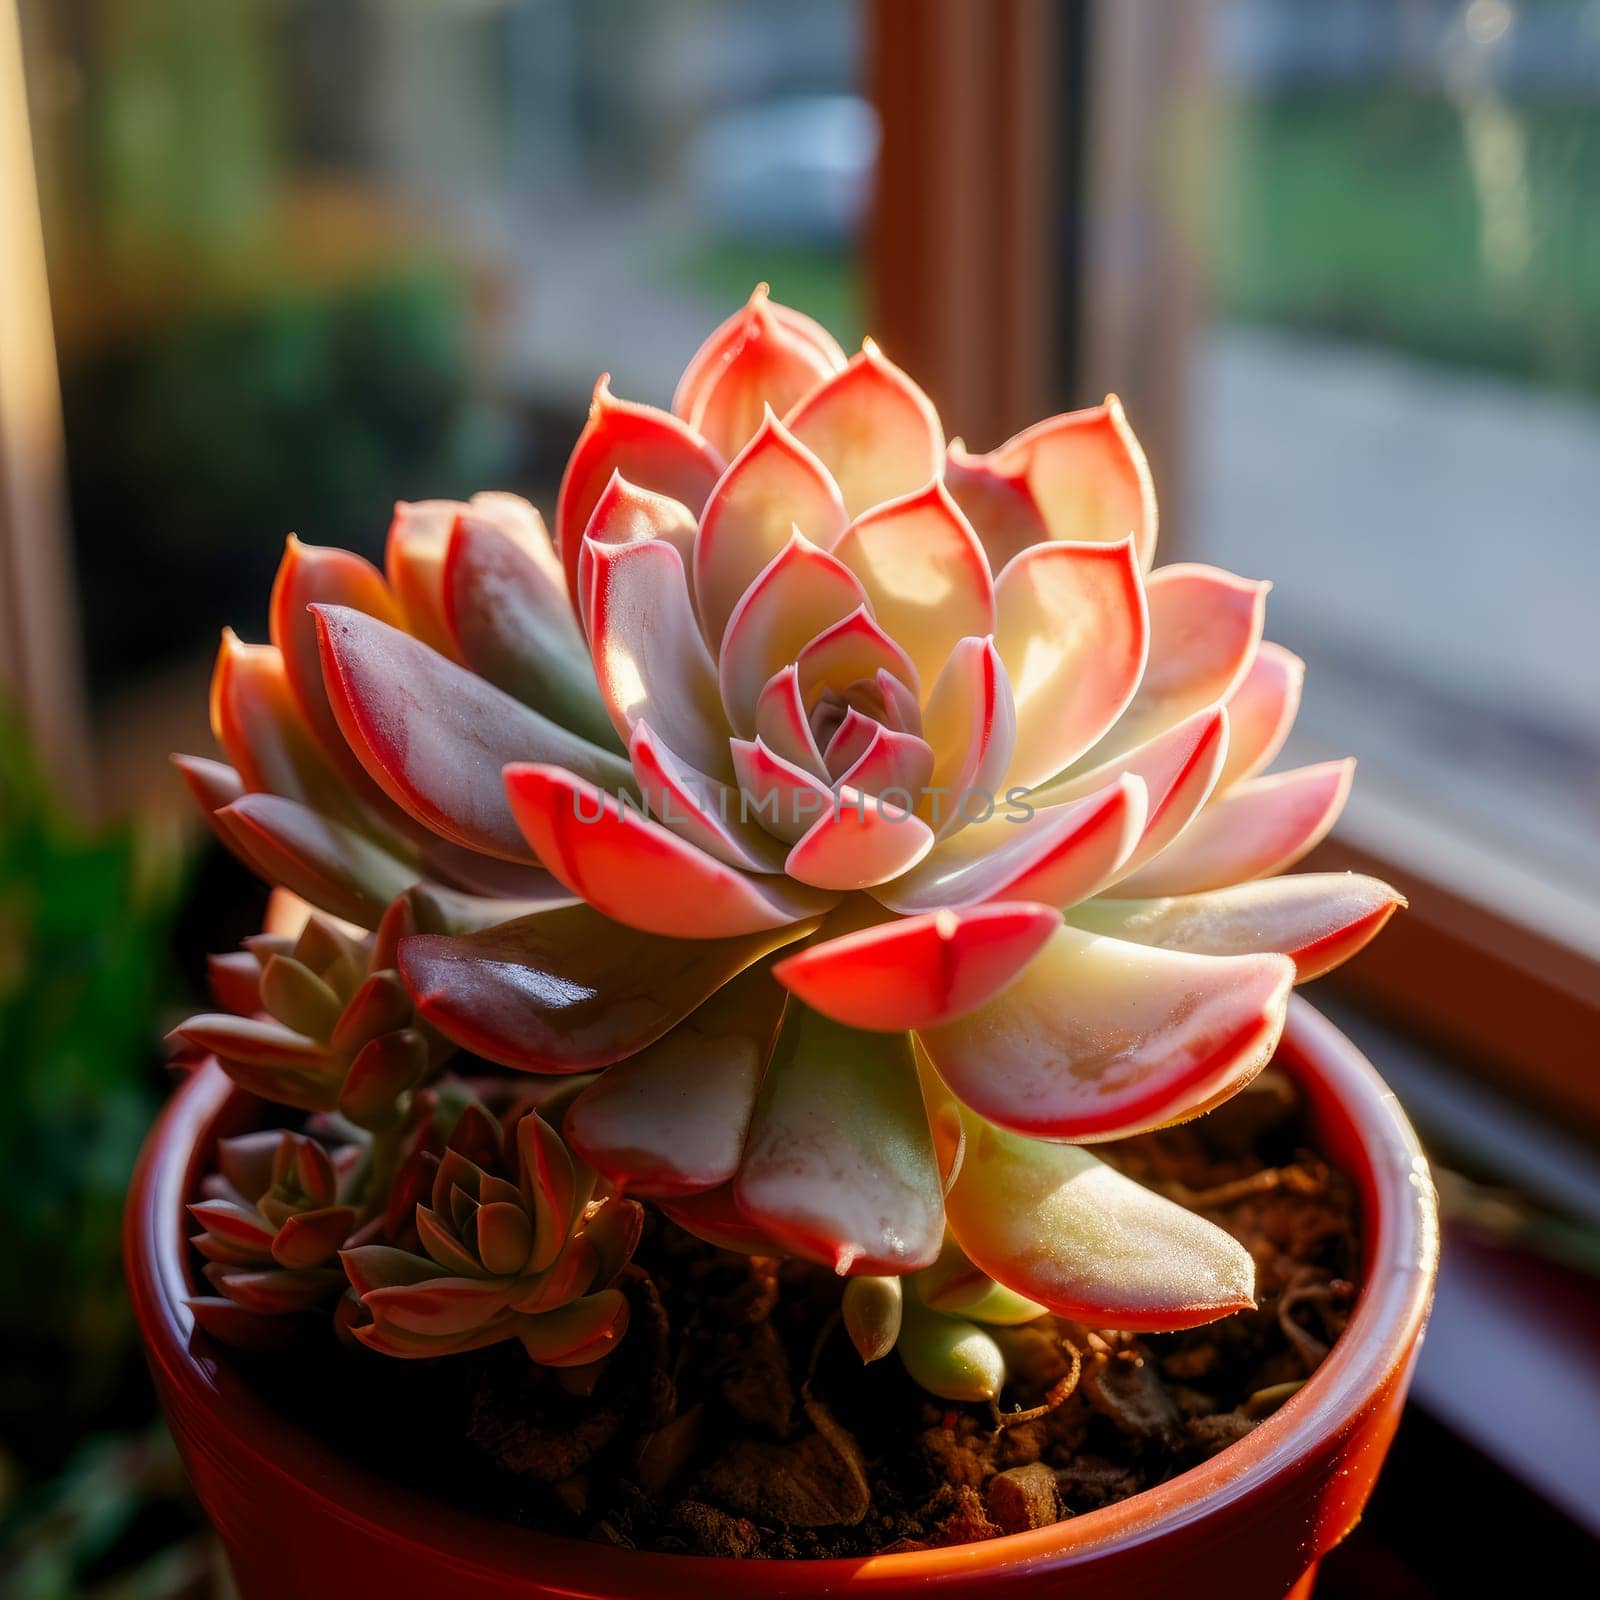 Succulent Echeveria in a pot on a window on a sunny day. Close up.